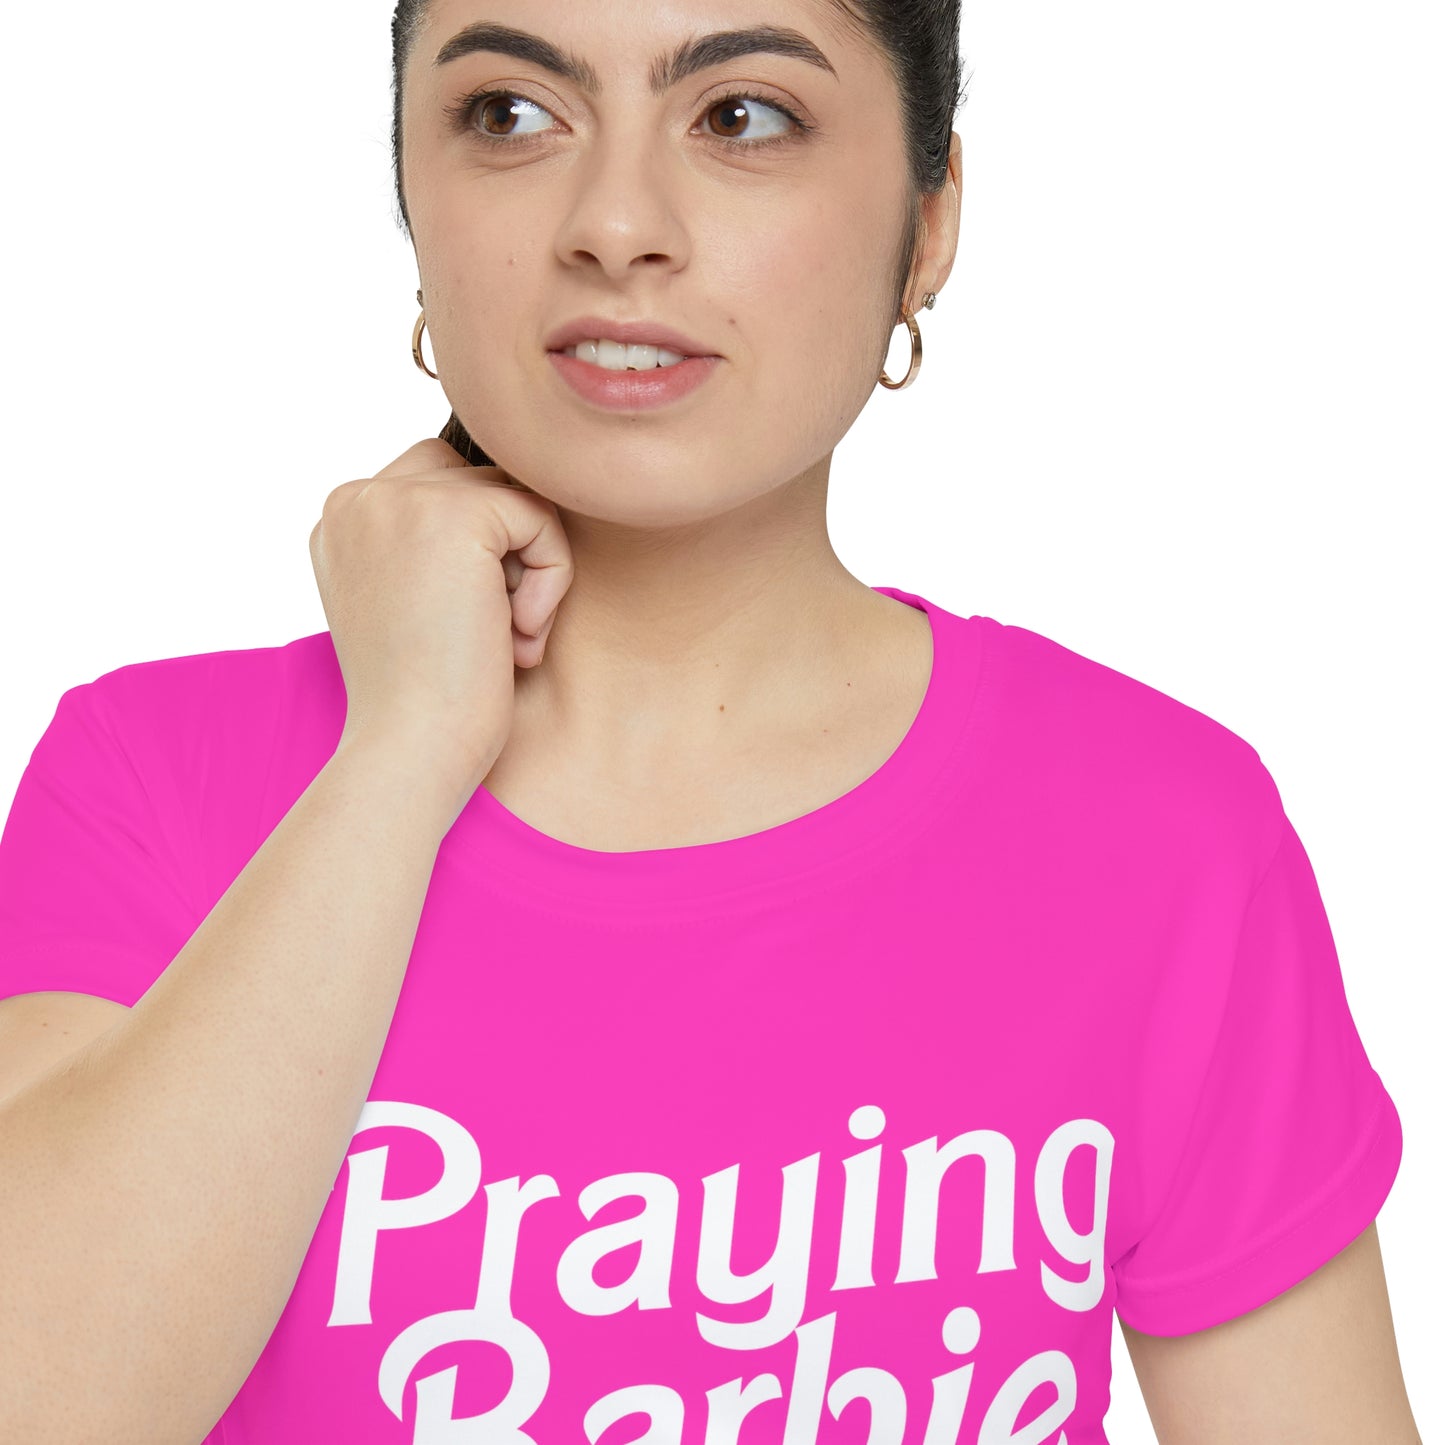 Praying Barbie, Bachelorette Party Shirts, Bridesmaid Gifts, Here comes the Party Tees, Group Party Favor Shirts, Bridal Party Shirt for women